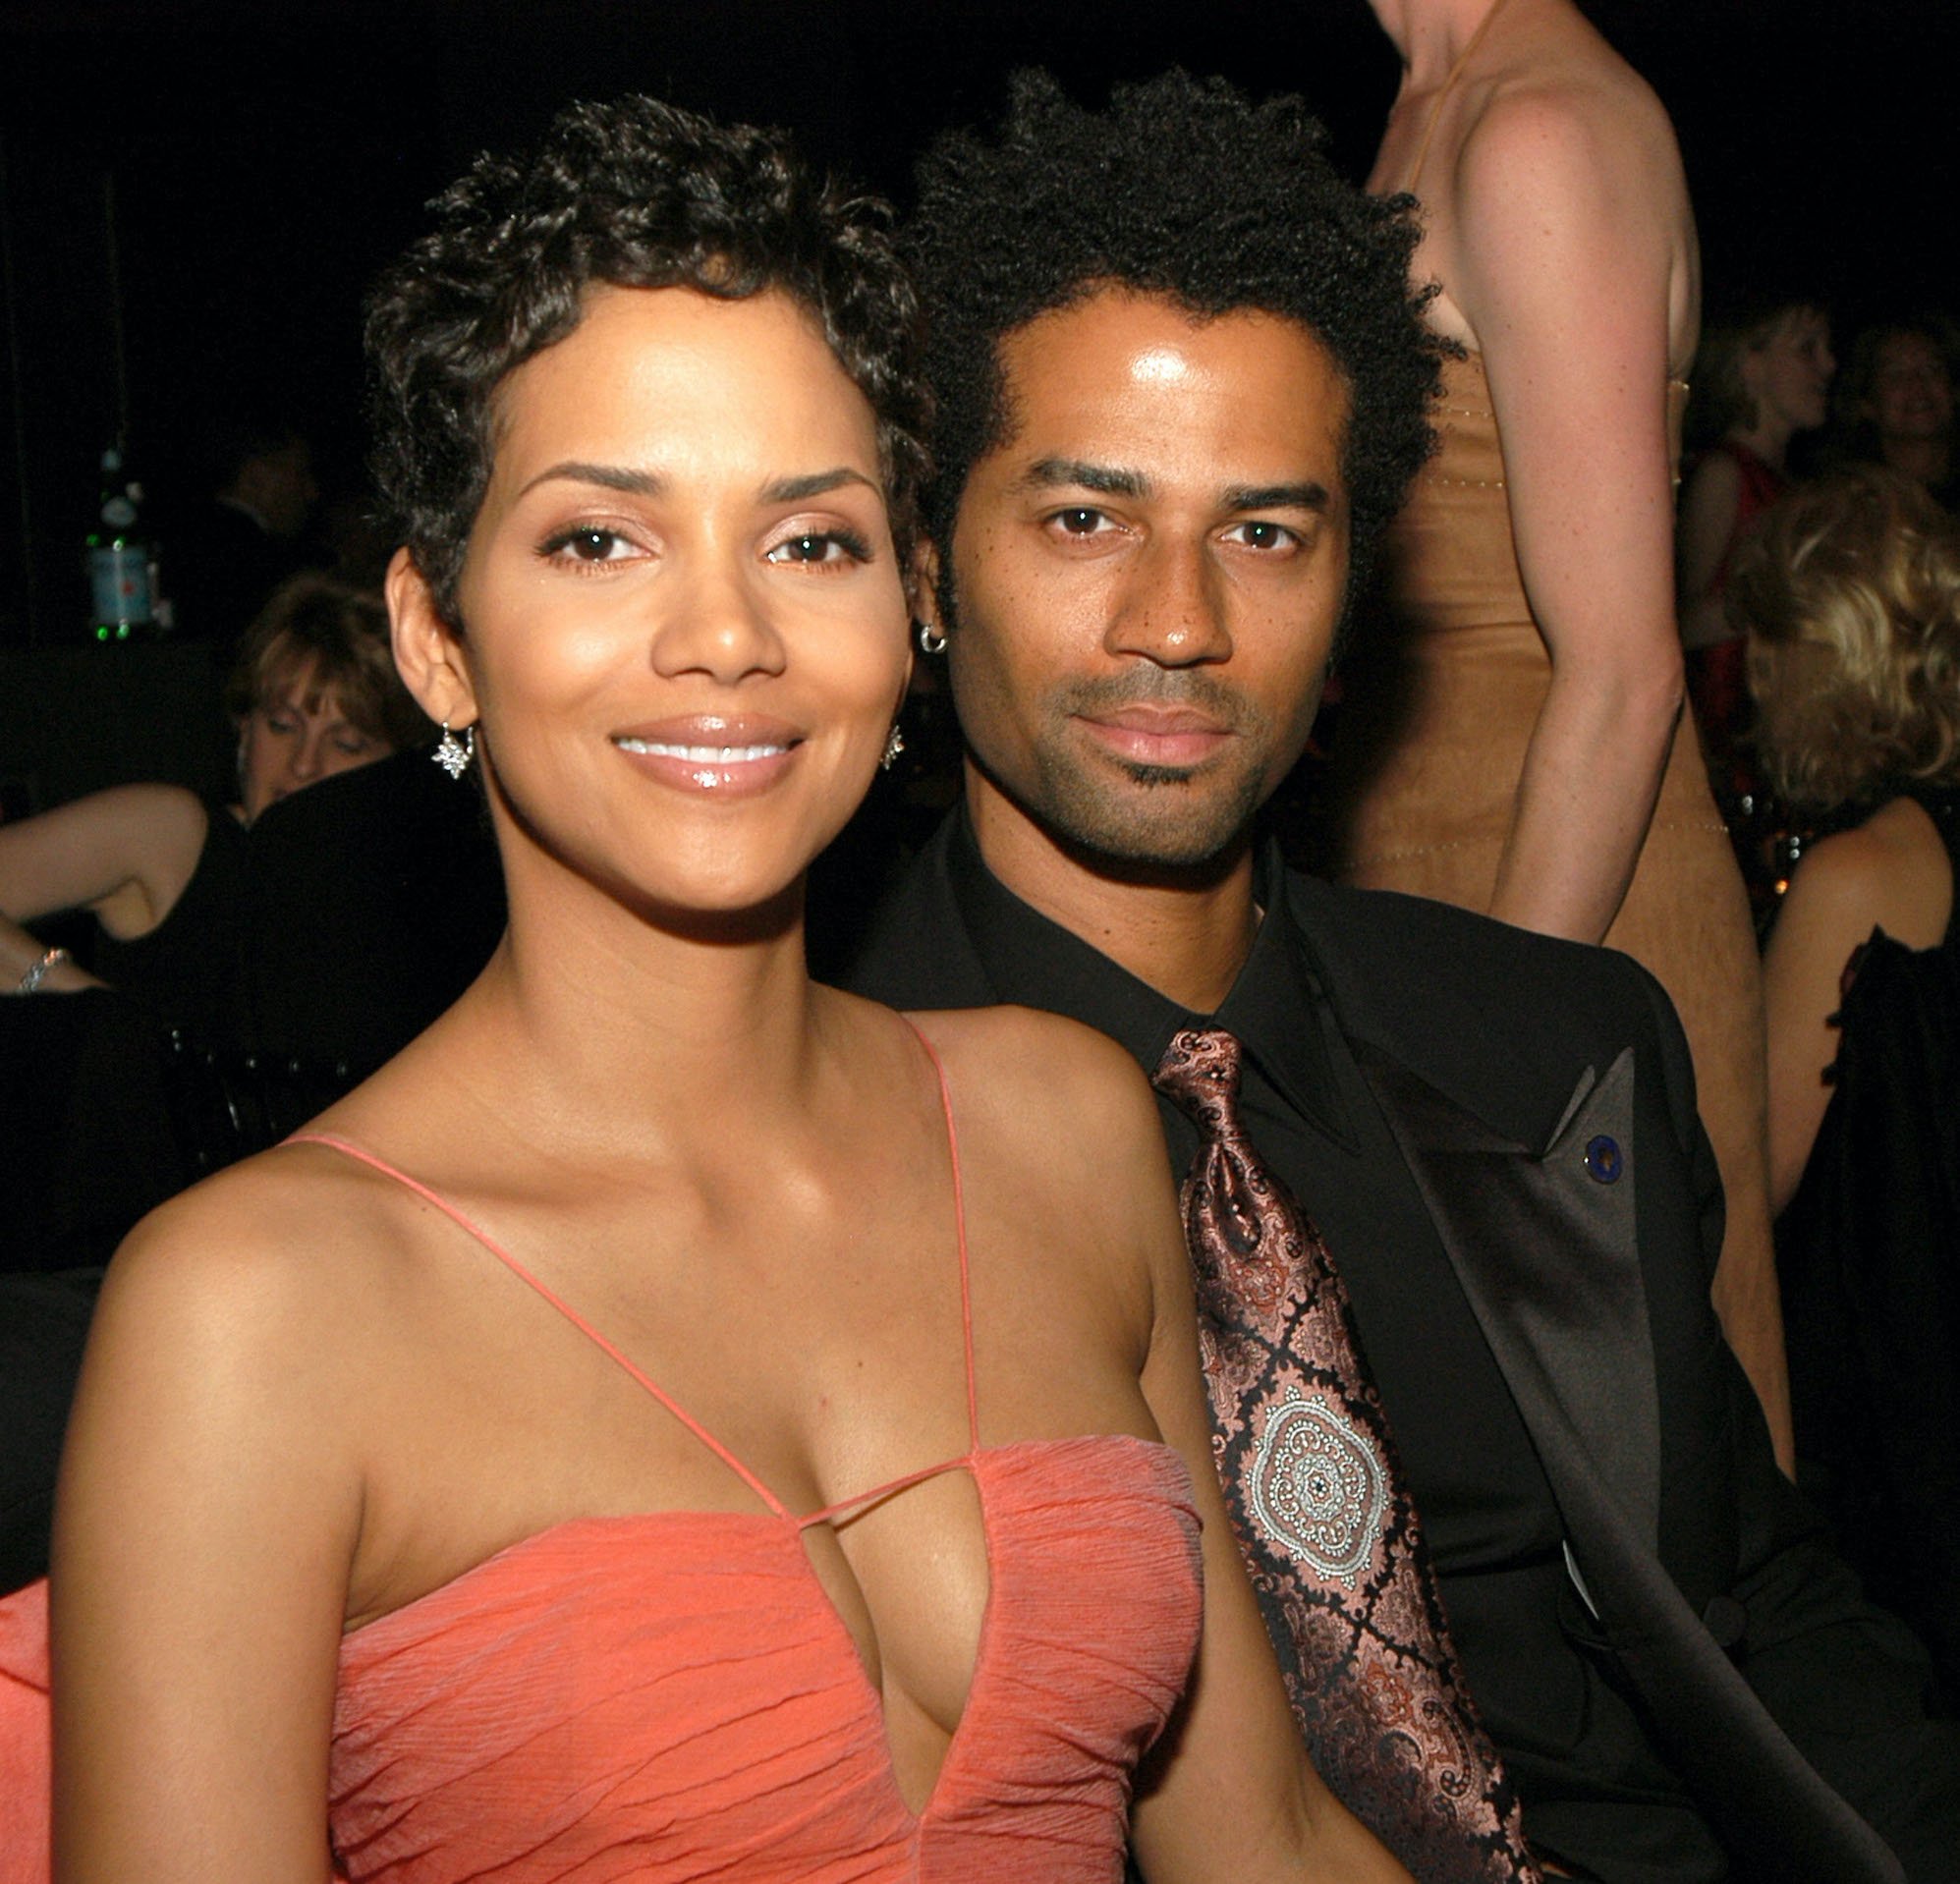 Why Did Halle Berry and Eric Benét Break Up?